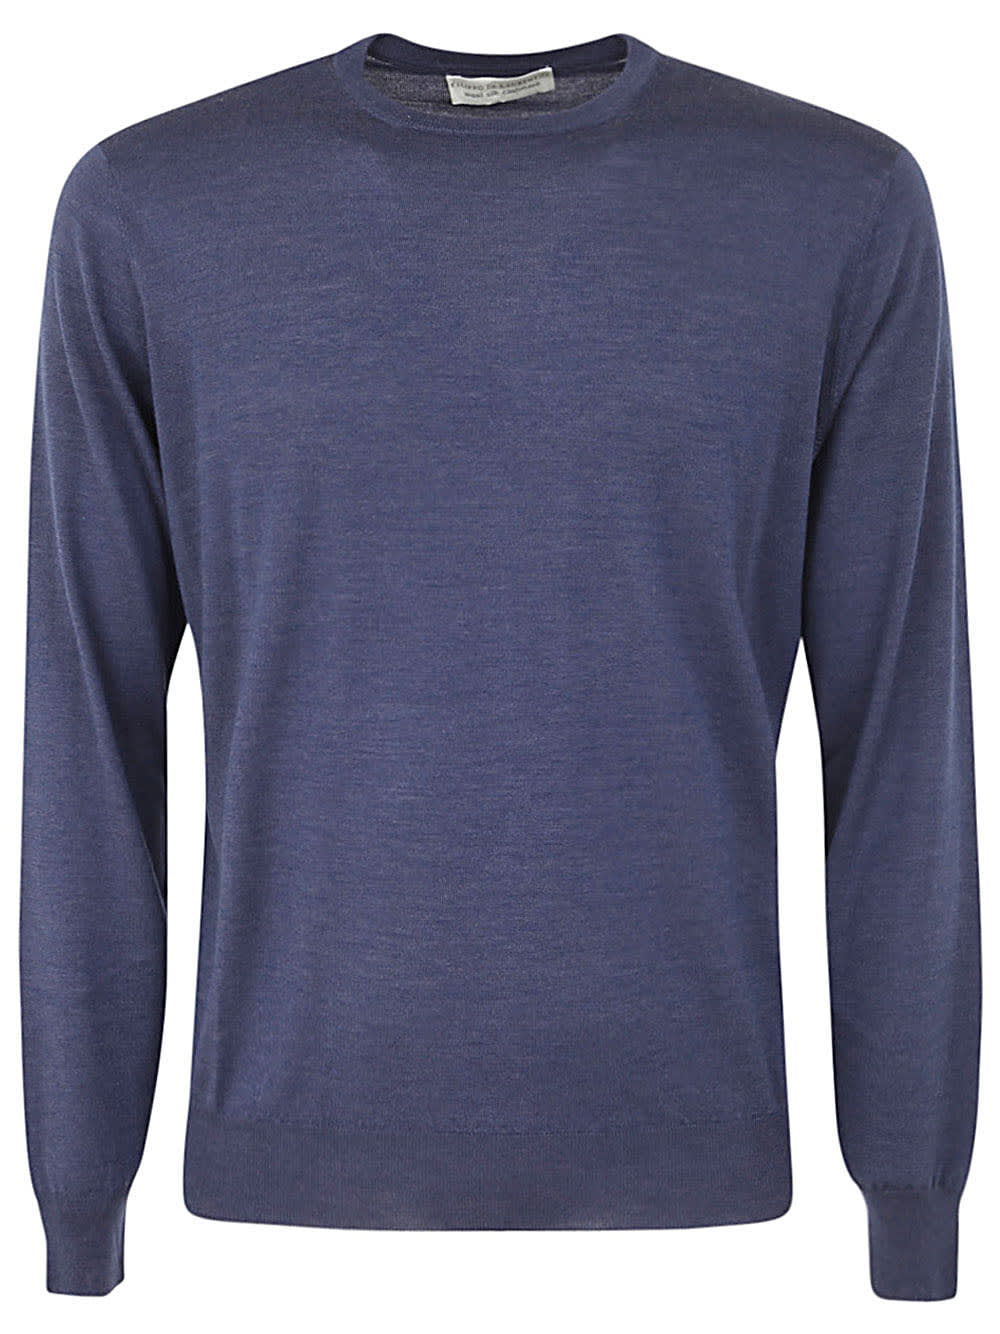 Wool Silk Cashmere Long Sleeves Crew Neck Sweater